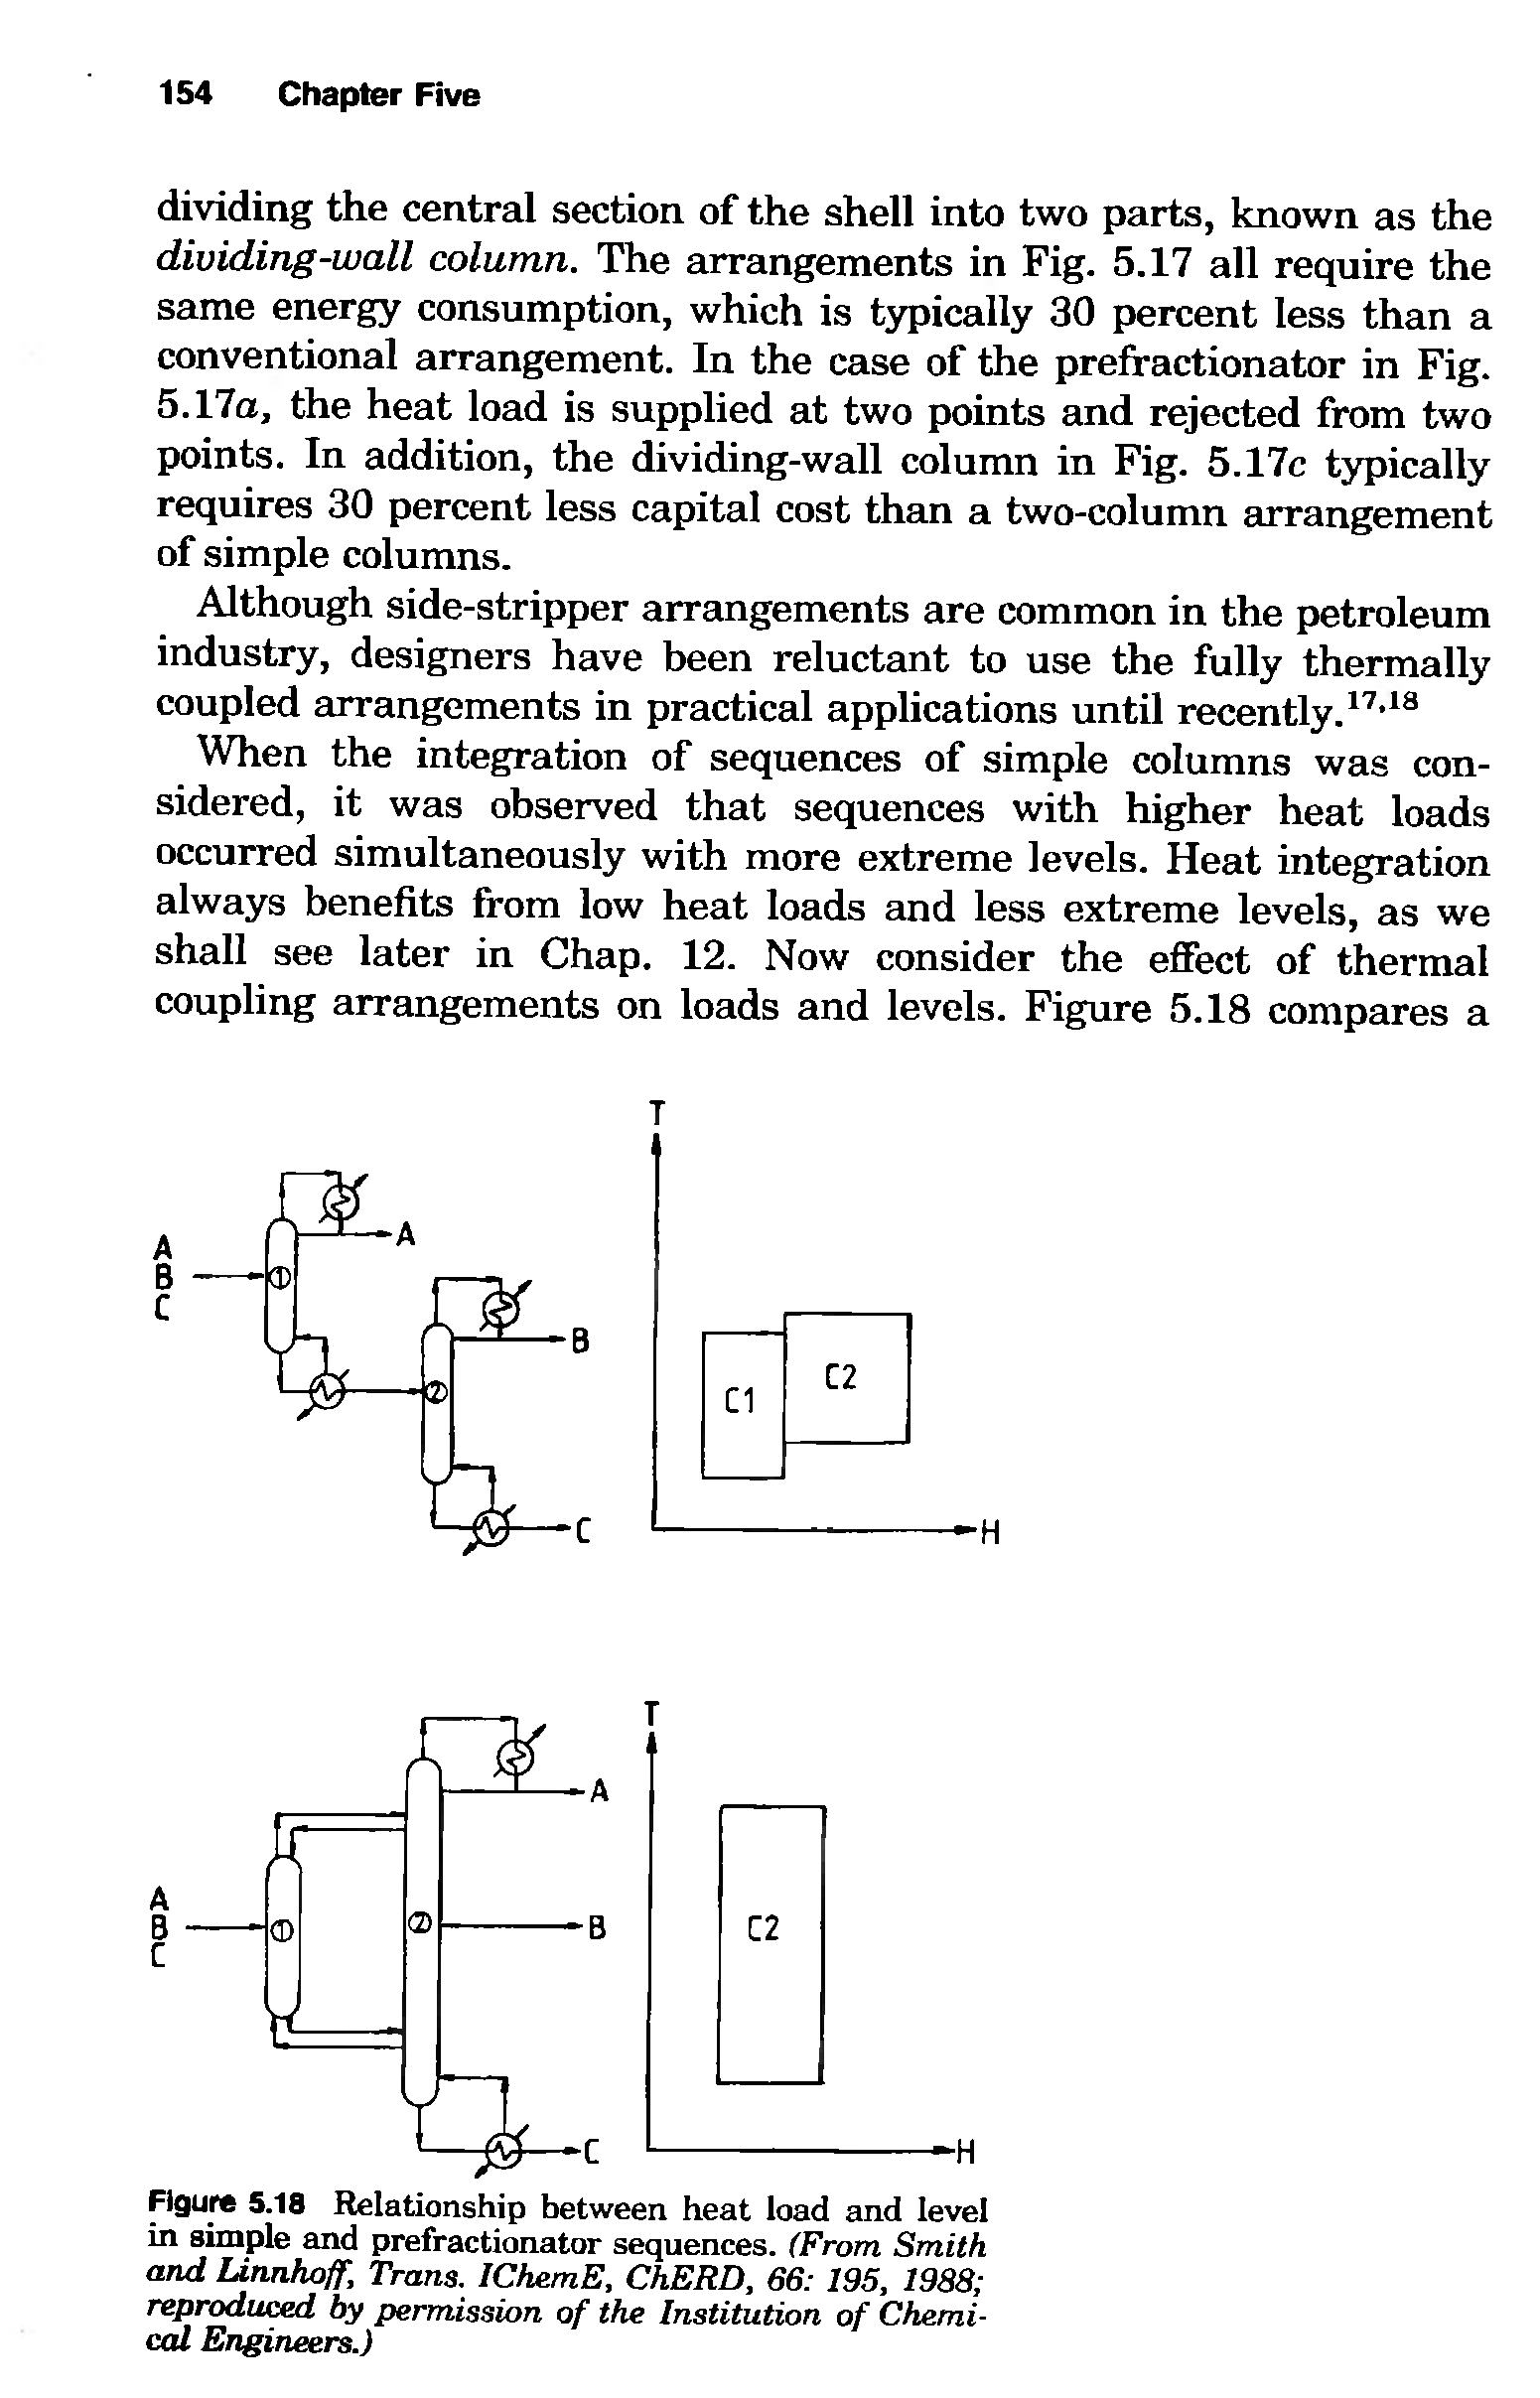 Figure 5.18 Relationship between heat load and level in simple and prefractionator sequences. (From Smith and linnhoff, Trans. IChemE, ChERD, 66 195, 1988 reproduced by permission of the Institution of Chemical Engineers.)...